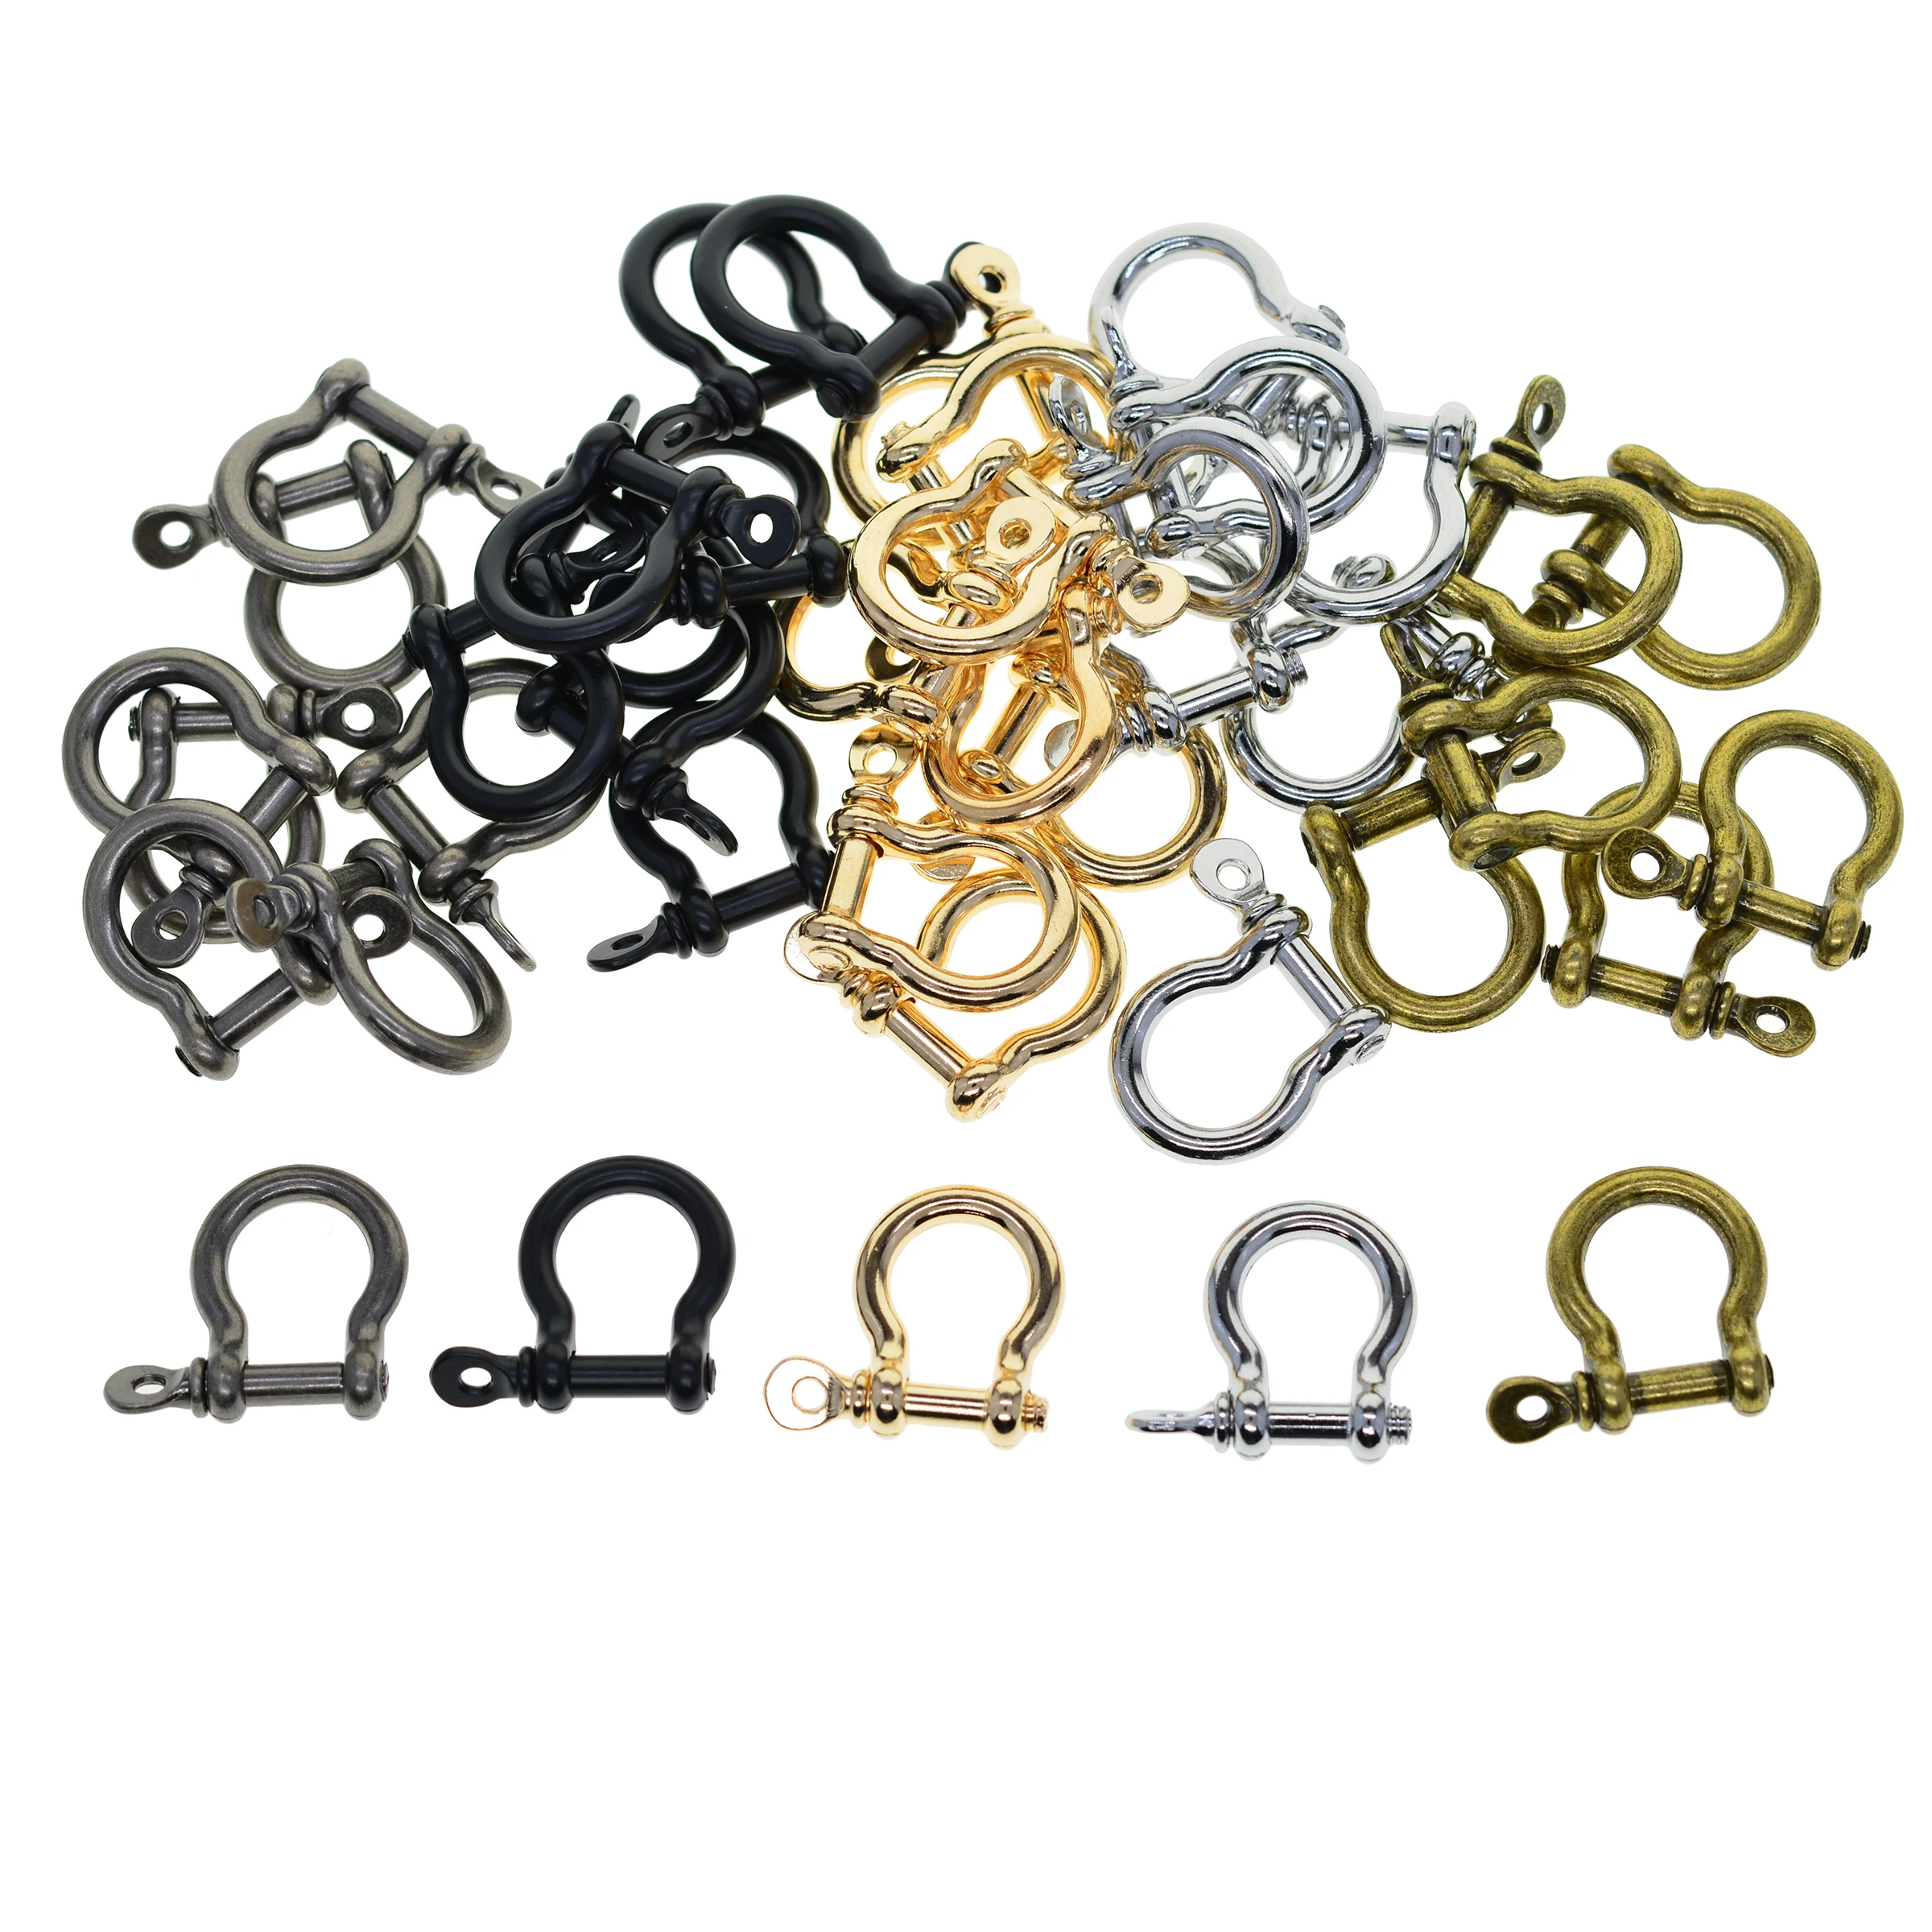 

10 PCS assorted color alloy screw pin lock U hook shackle leather bangle connector joint horse shoe keychain lanyard FOB EDC DIY